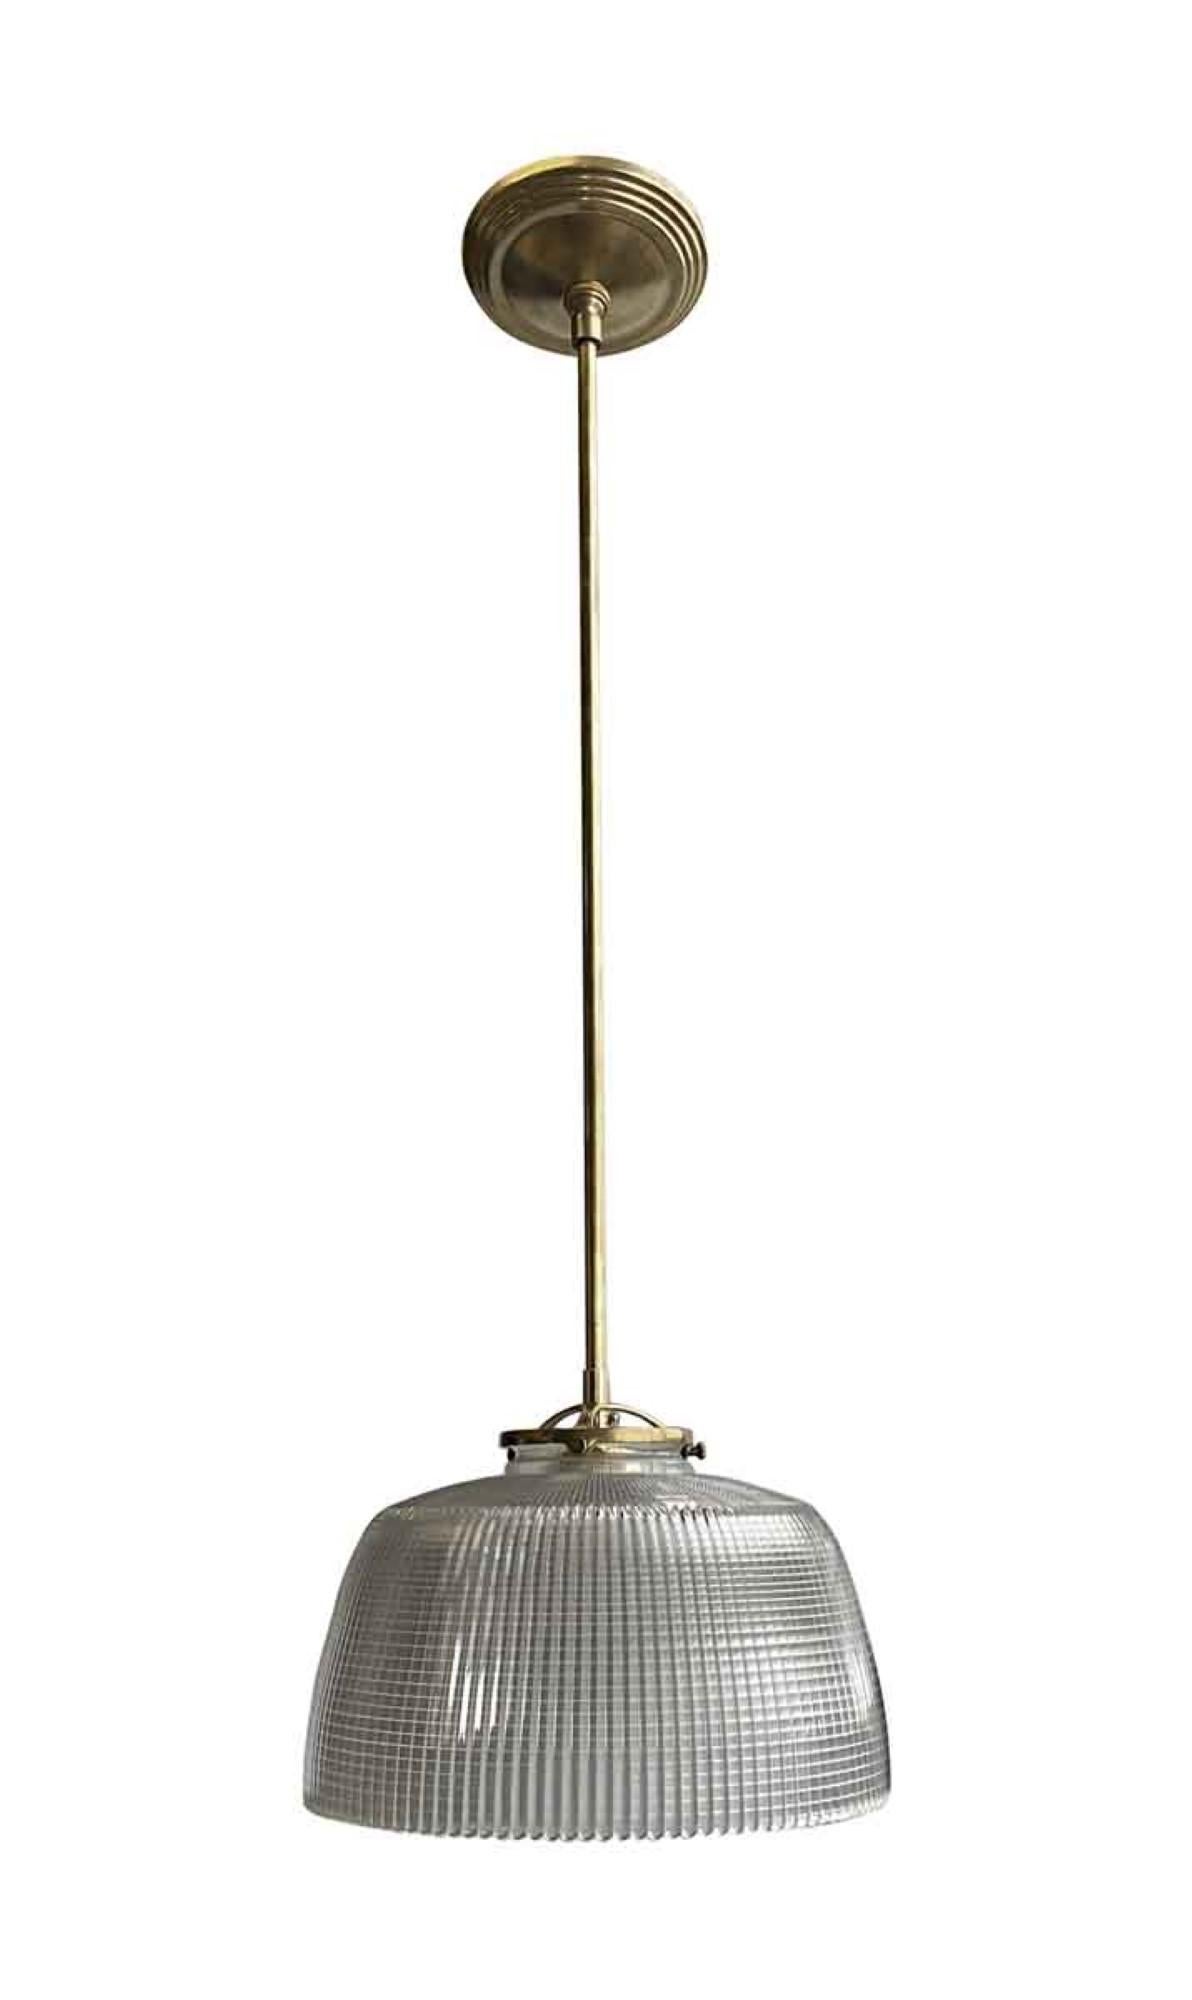 Unusual 1902s clear Holophane pendant globe not fitted out with new brass hardware such as canopy. This can be seen at our 400 Gilligan St location in Scranton. PA.